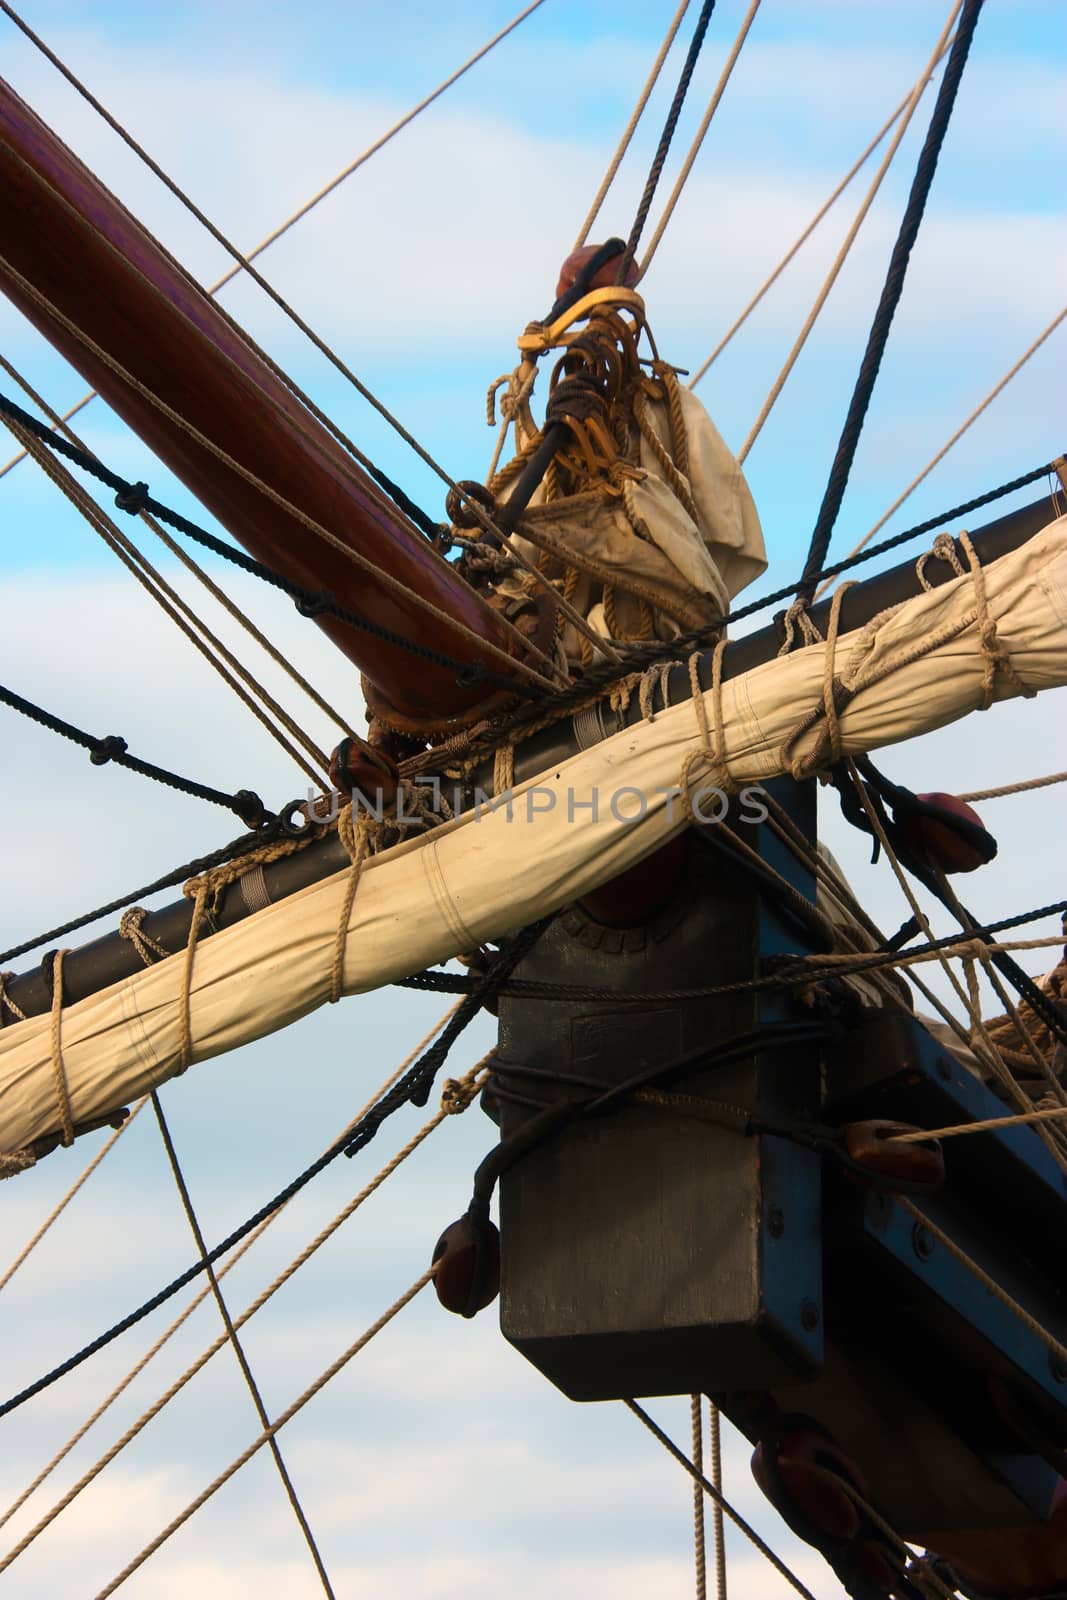 Vertical shot of bowsprit, rigging and furled sail of an old sailing ship